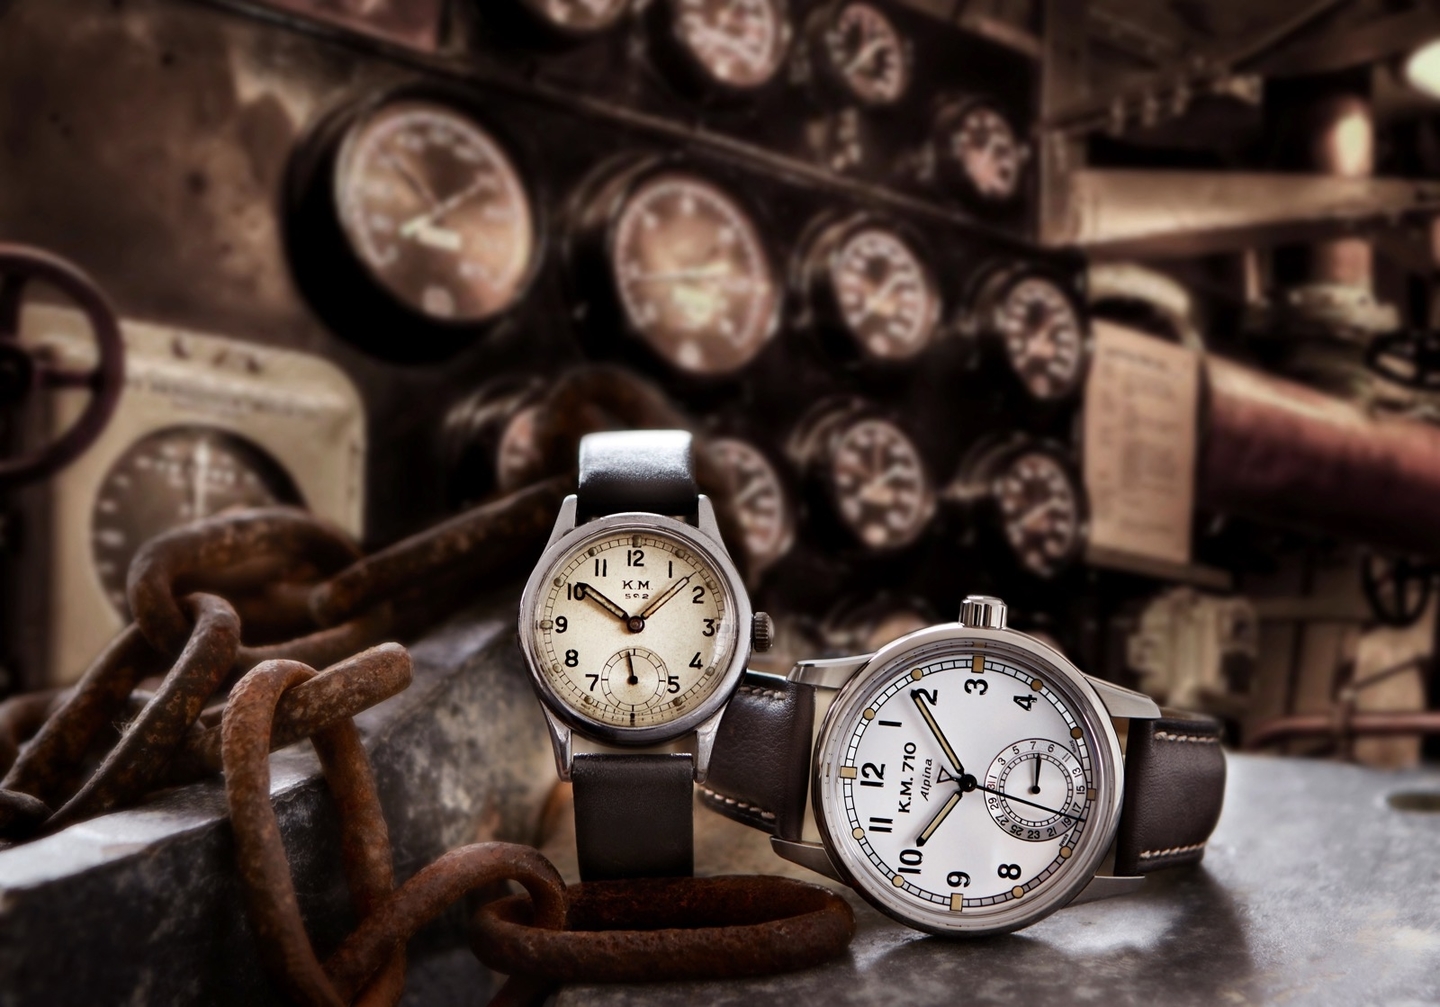 Introduce the Alpiner Heritage Manufacture KM-710 to you